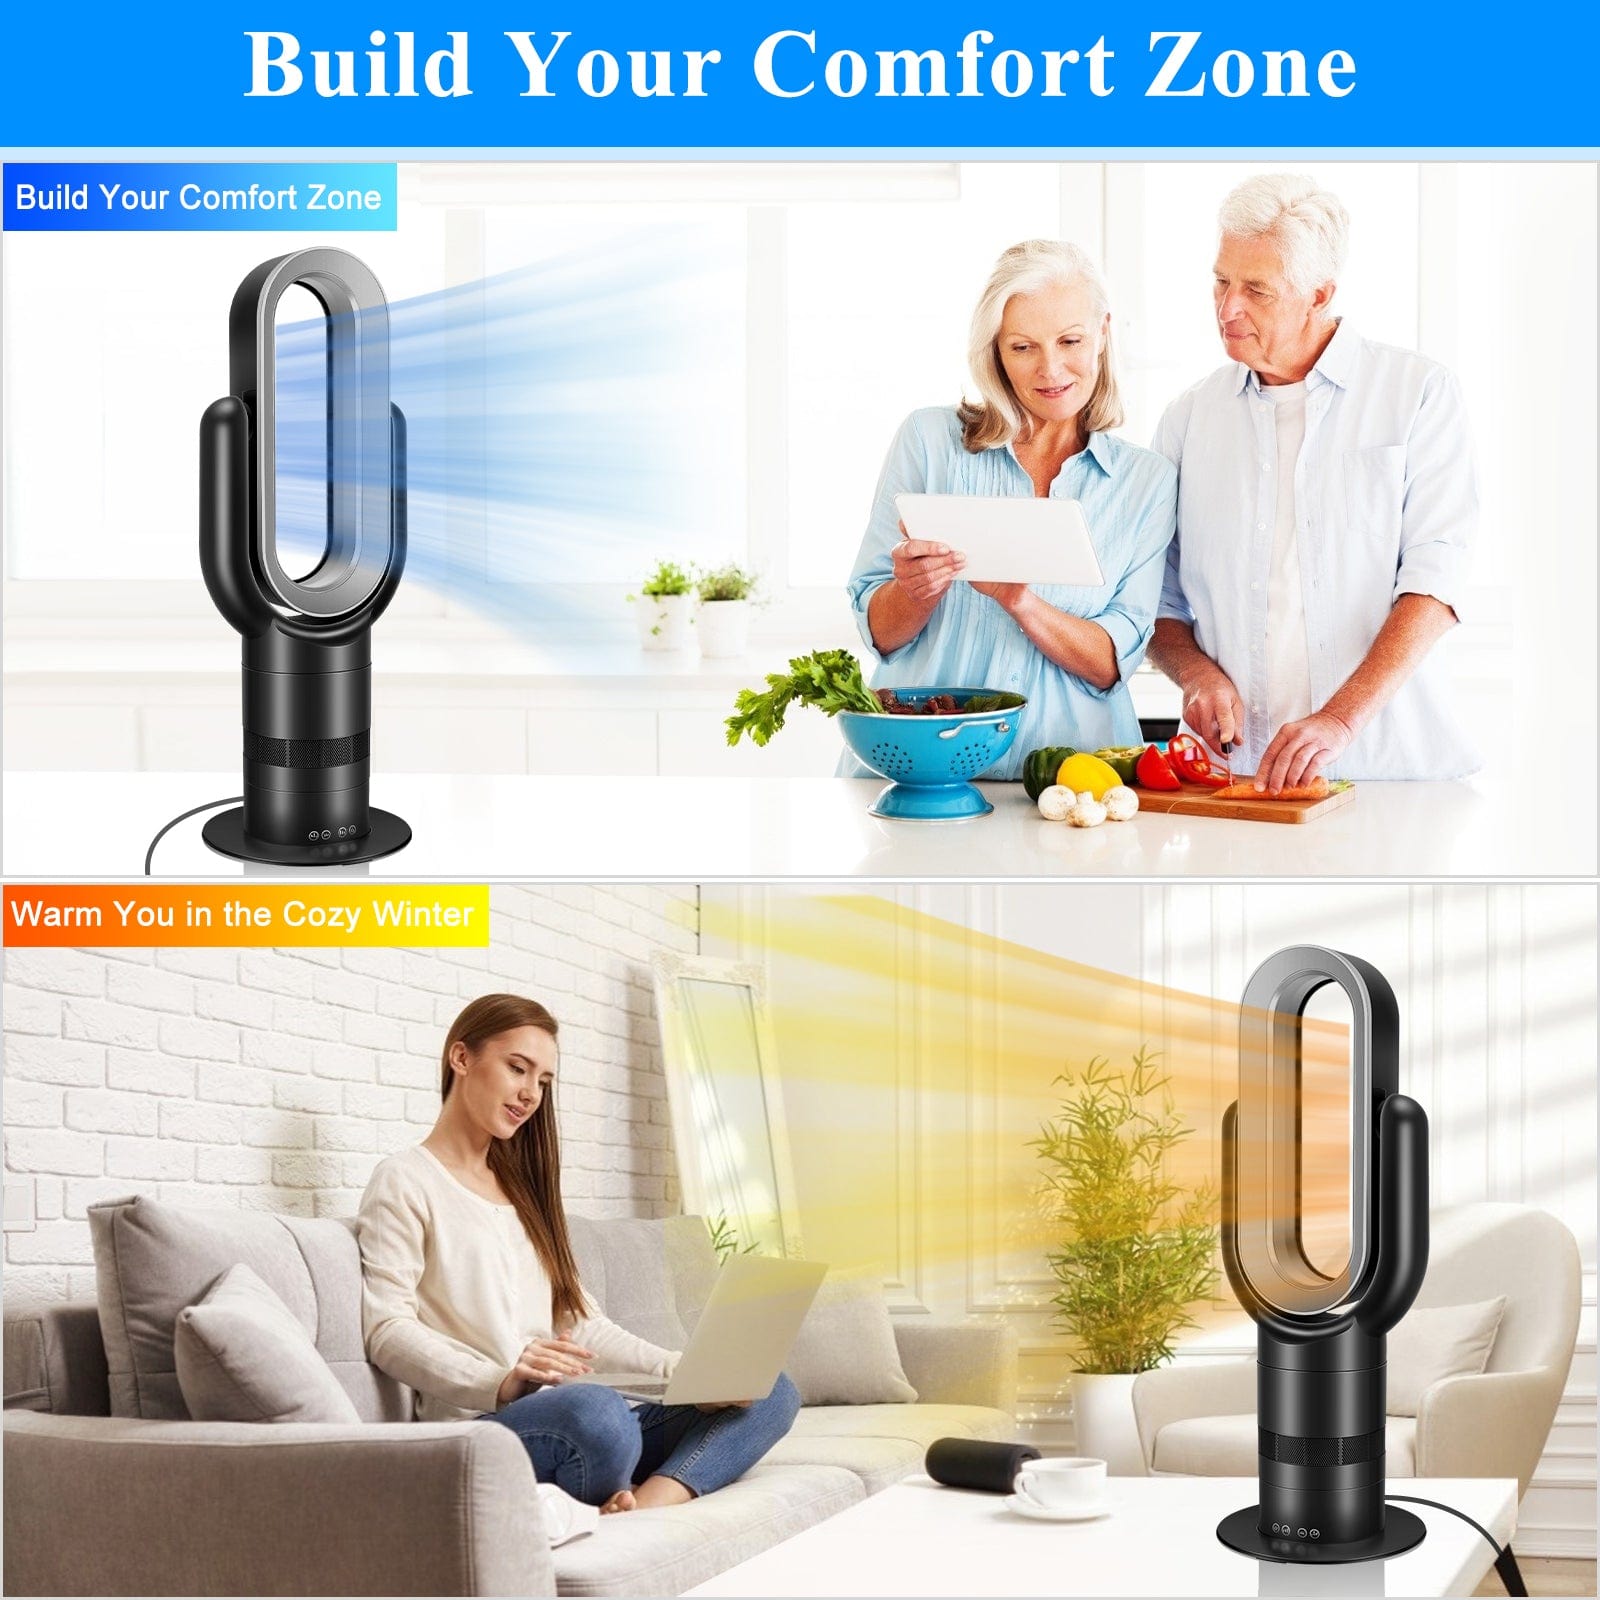 ShiningShow 26-inch Space Heater Bladeless Tower Fan, Heater & Coolingn Combo, with Remote Control, for Home Air Conditioner